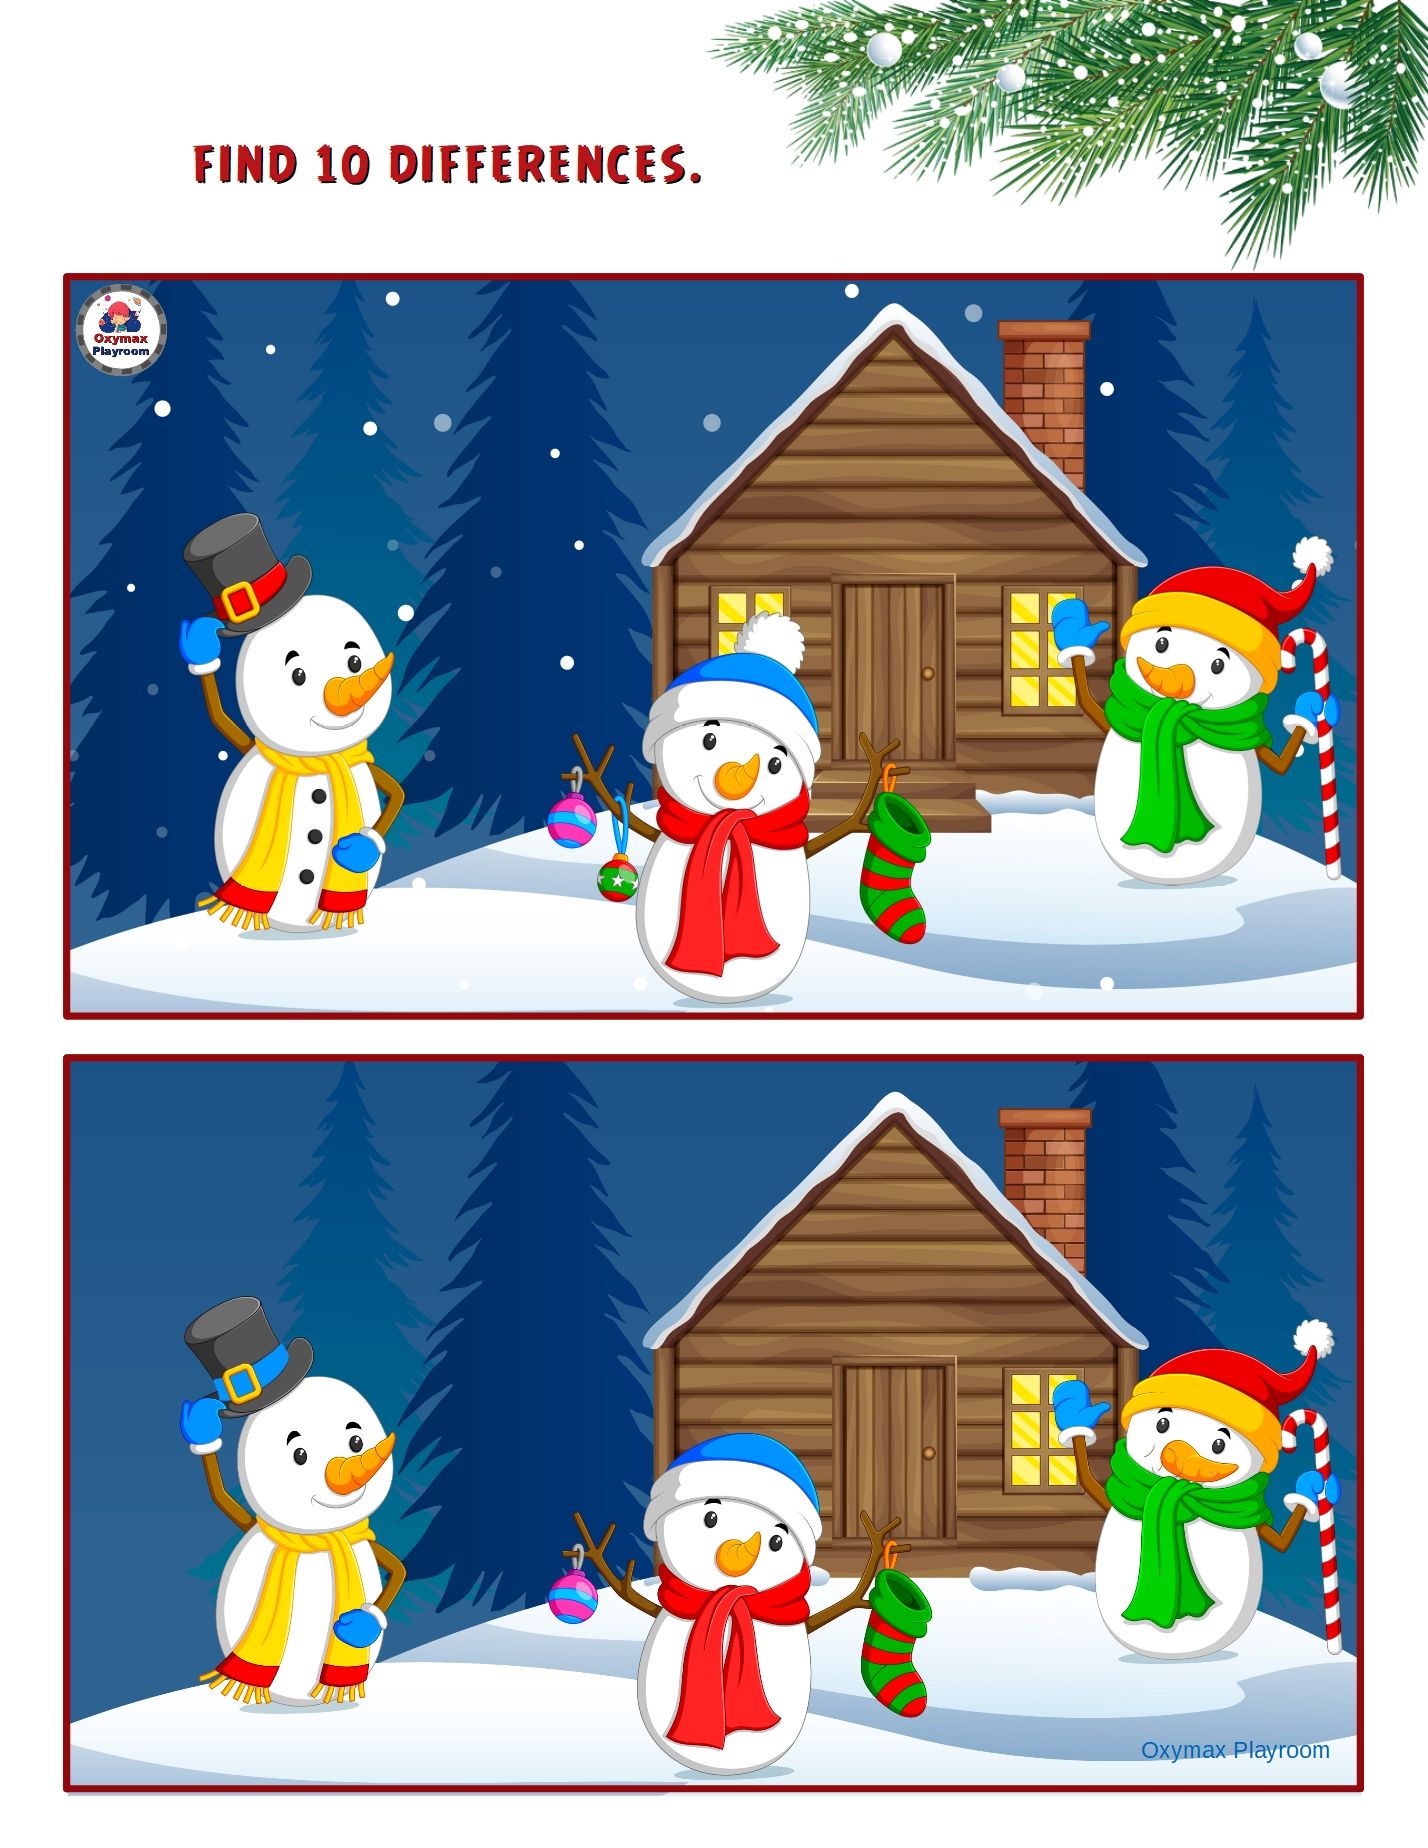 spot-the-differences-kids-game